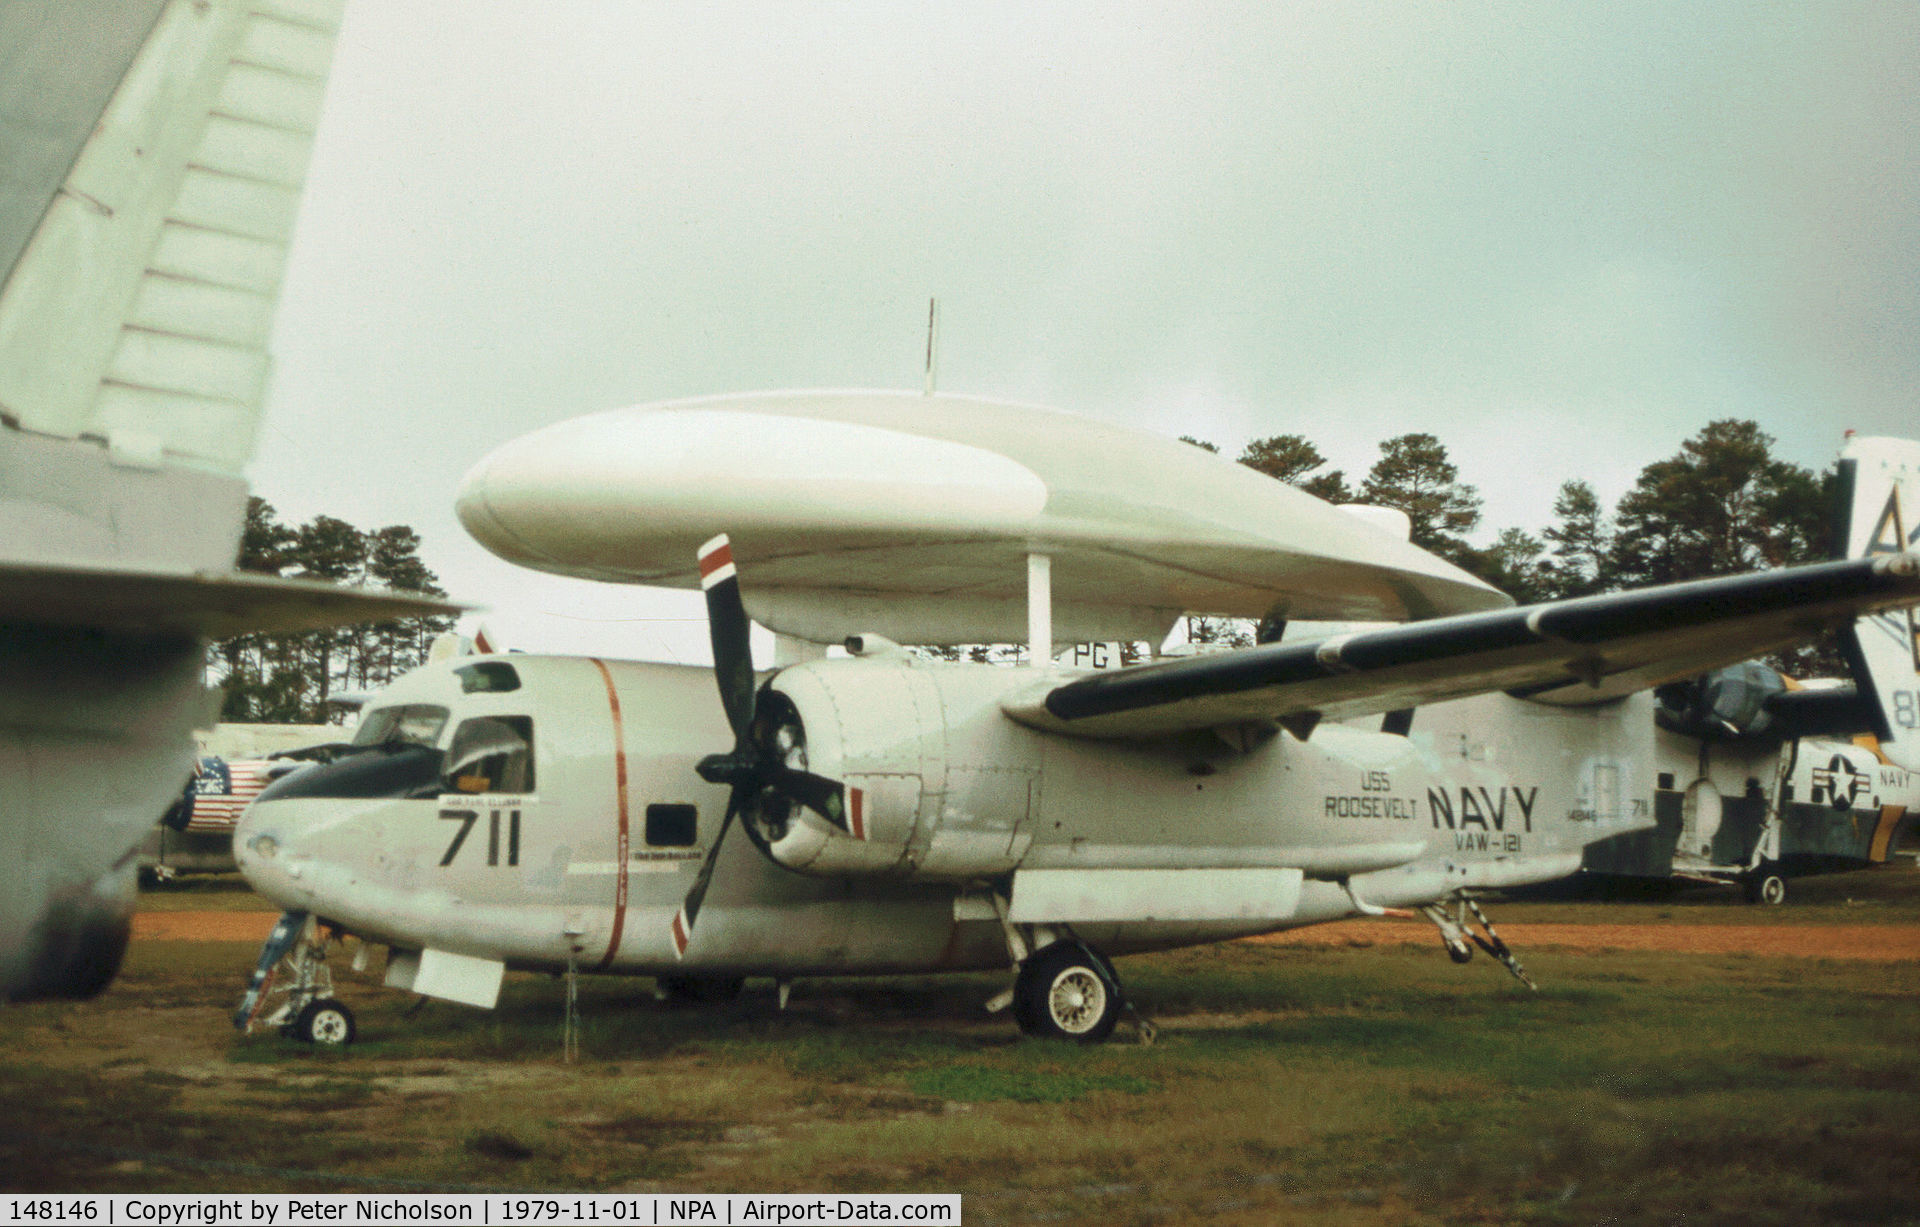 148146, Grumman E-1B Tracer (G-117) C/N 64, Another view of this Early Warning Squadron VAW-121 E-1B Tracer as displayed at the Pensacola Naval Air Museum in November 1979.